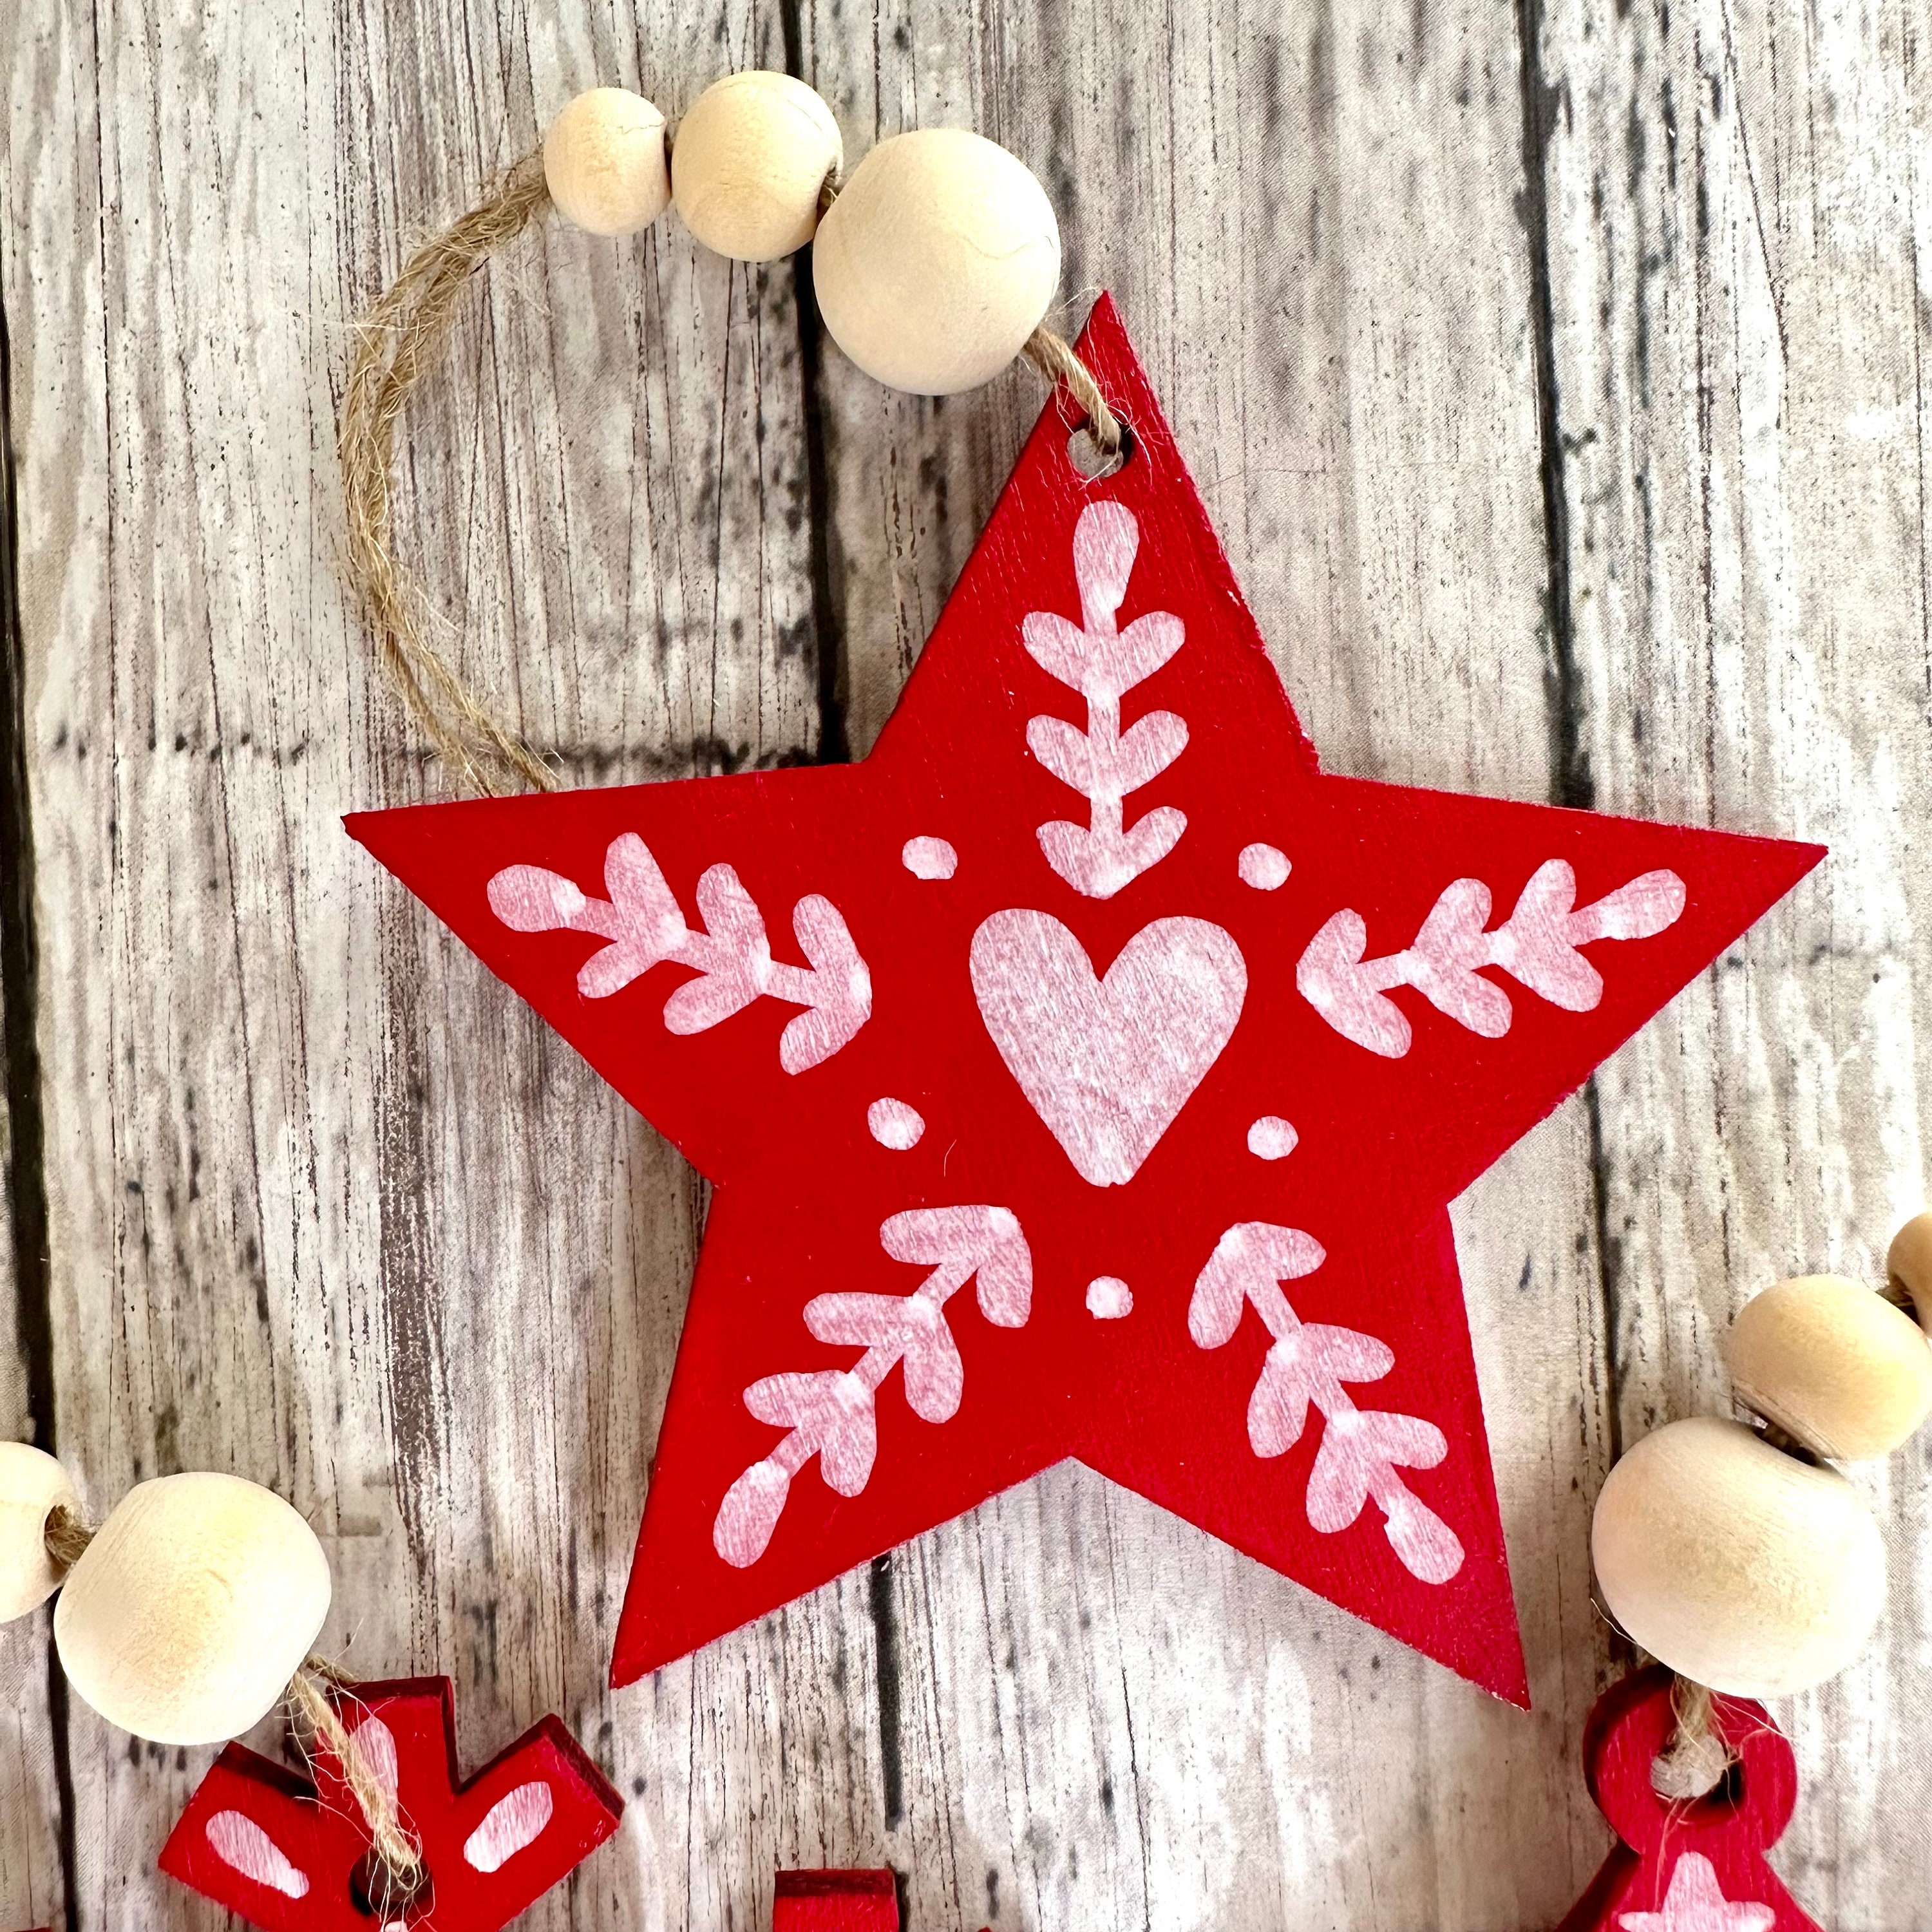 Rose Gold, White & Red Hand Painted Set of 3 Heart Ornaments, Hand Painted  Wood Cutout Ornaments, Rustic Farmhouse Decor 